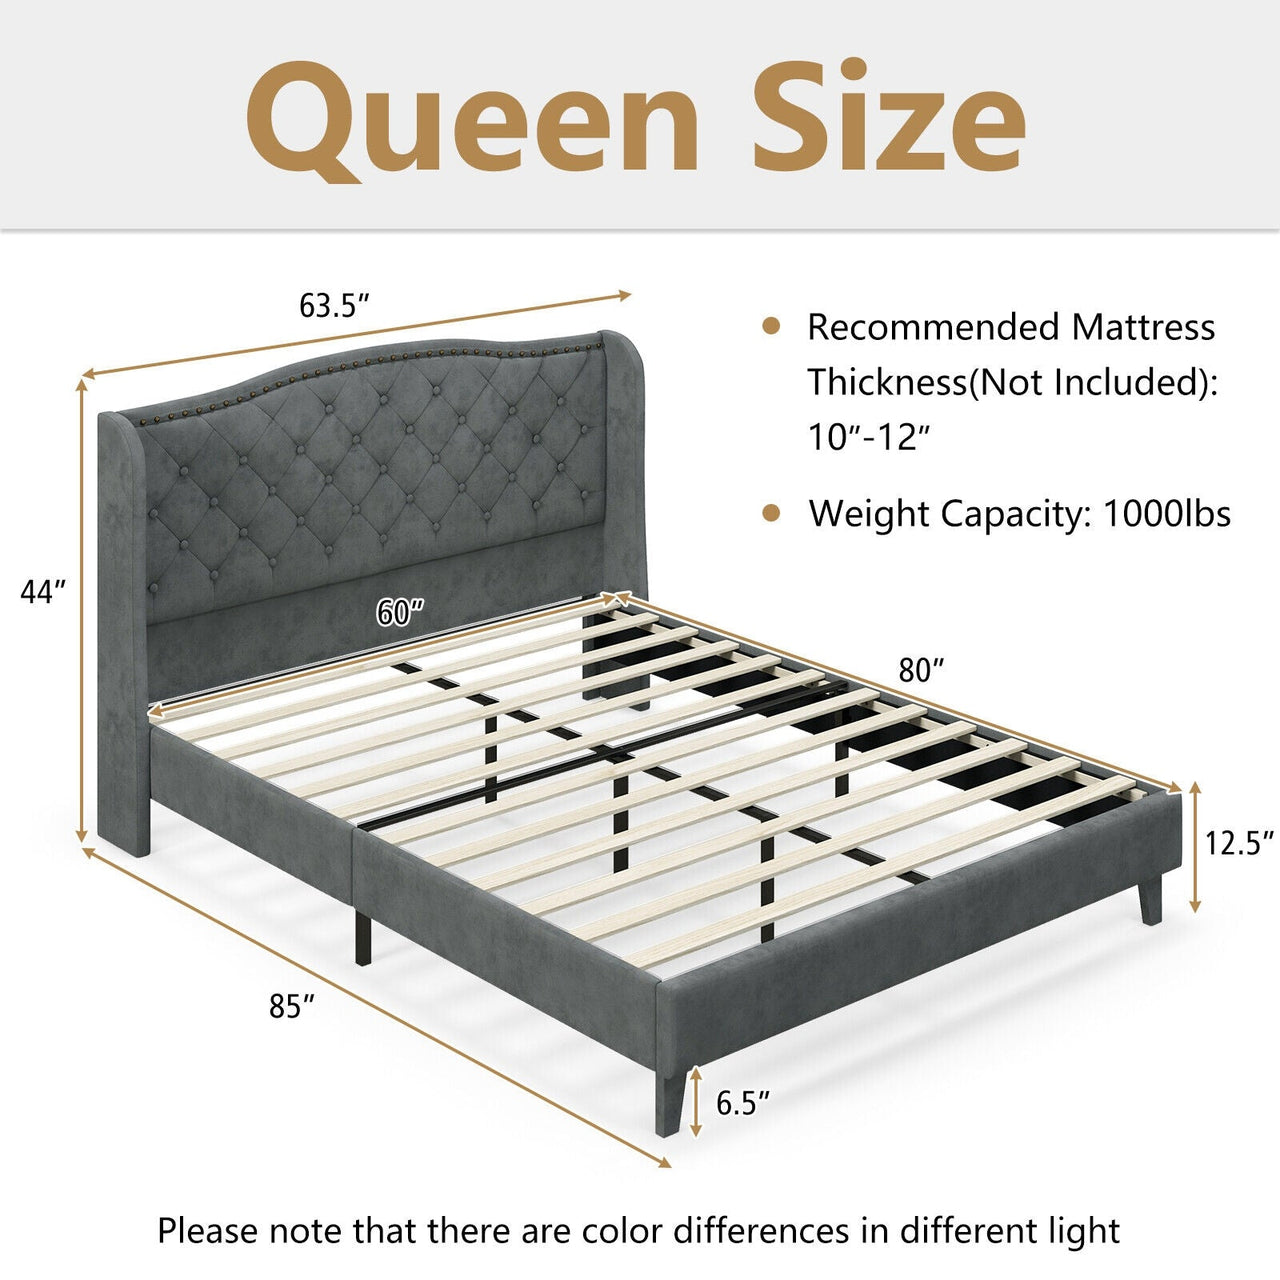 Full/Queen Size Upholstered Platform Bed Frame with Button Tufted Headboard